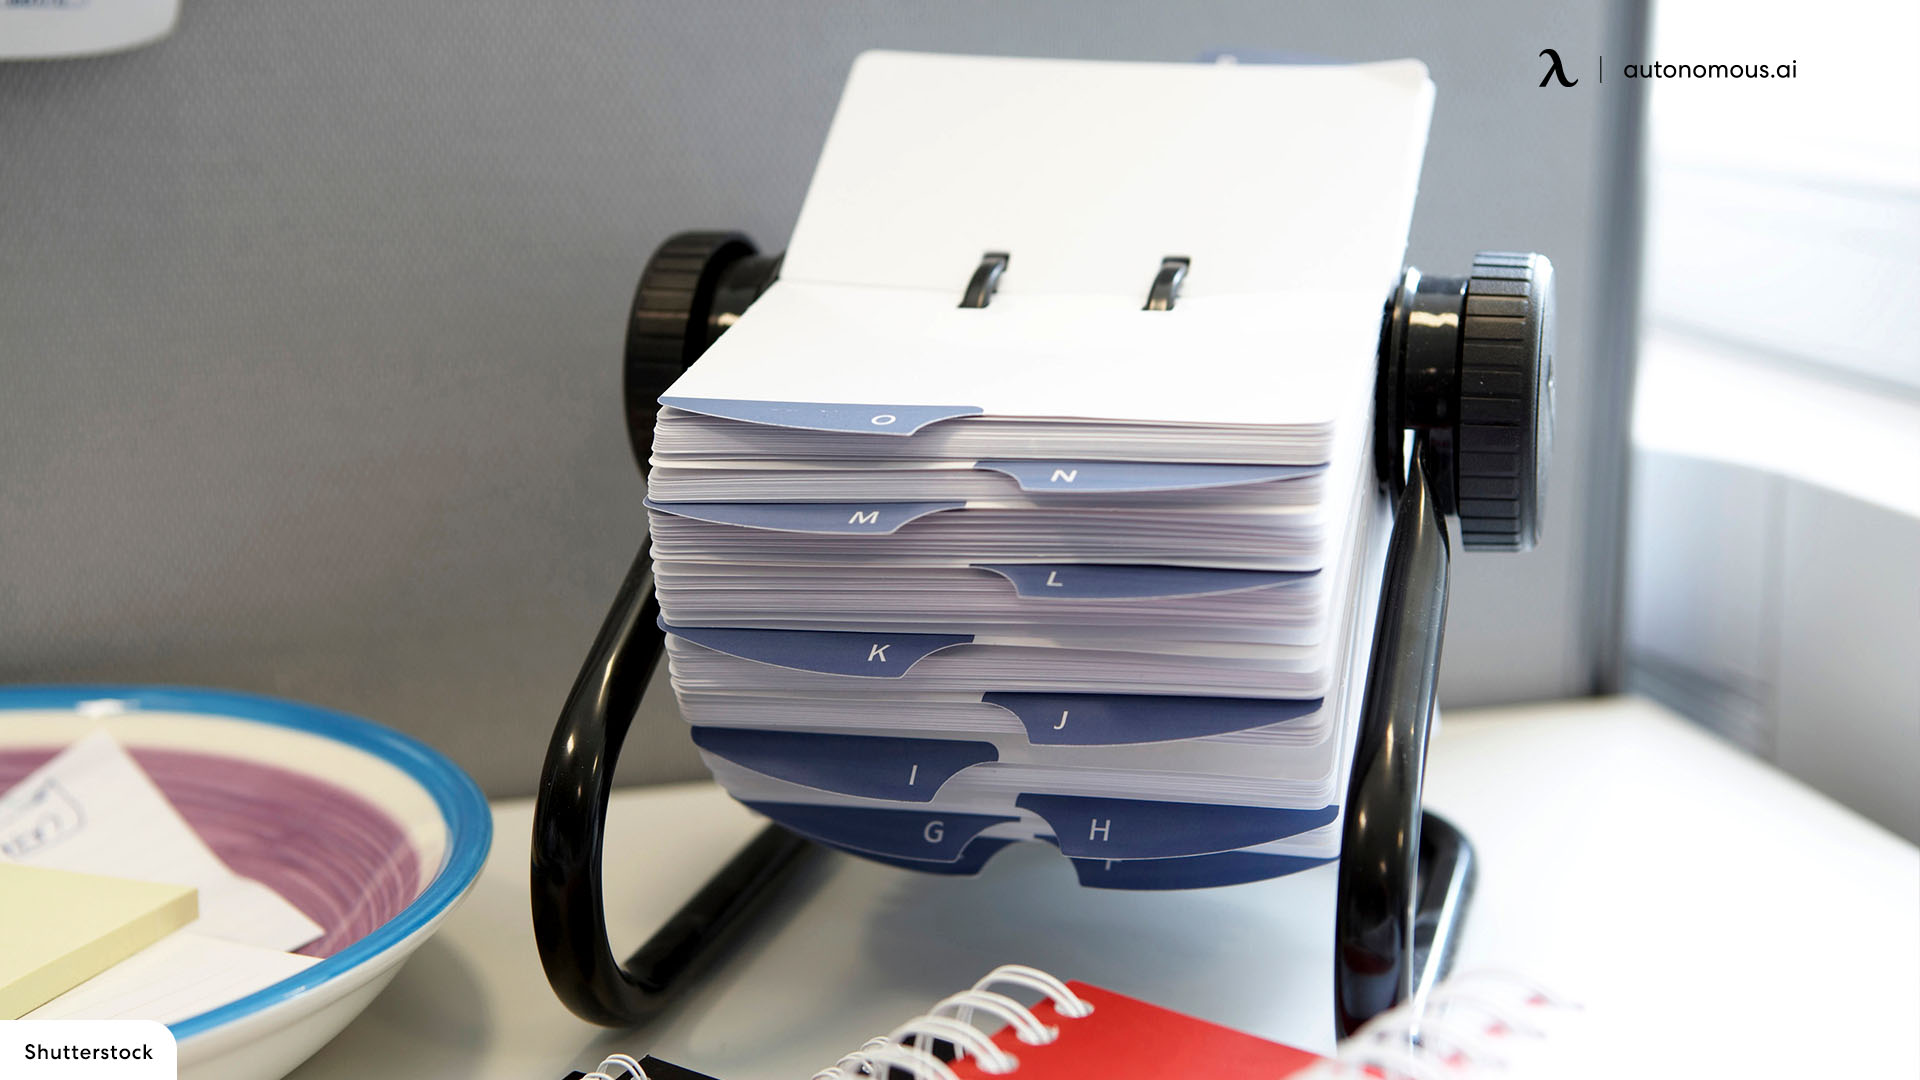 Rolodex work from home essentials